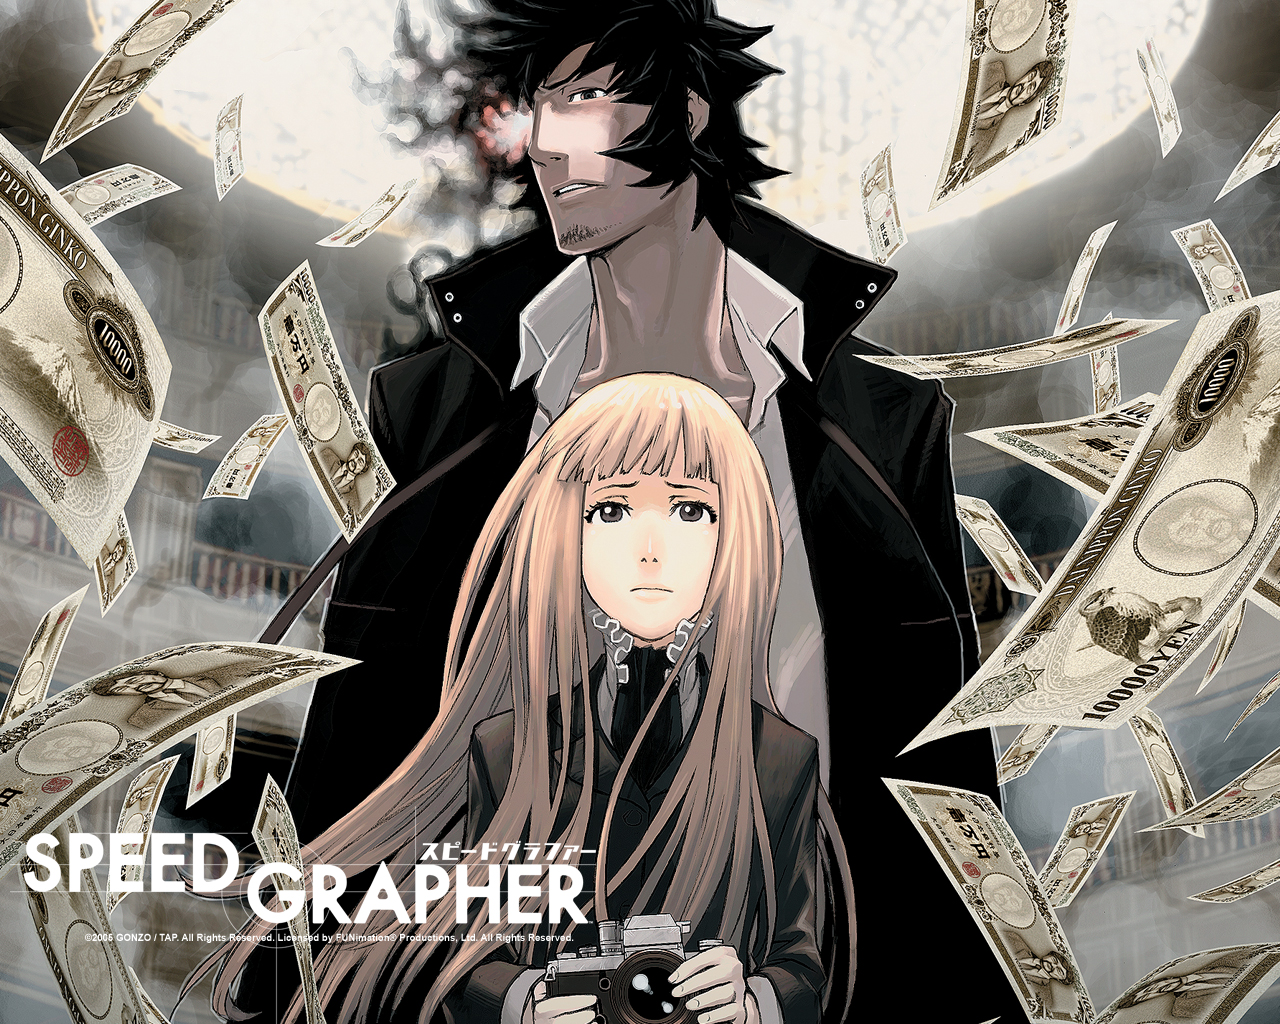 Book & Movie Dimension a Blog: An Anime Series Review: Speed Grapher (2005)